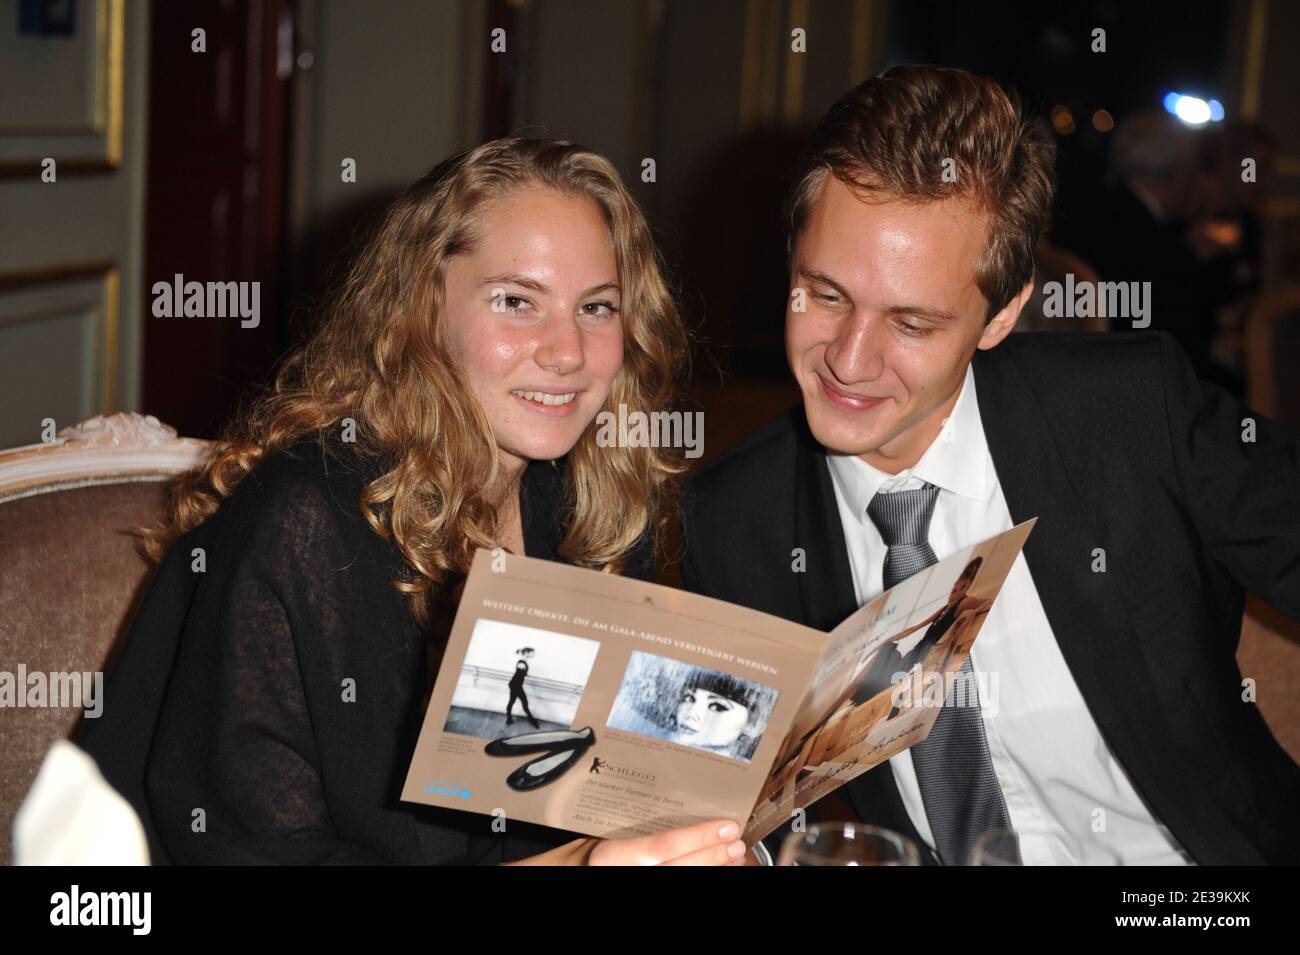 Exclusive Emma Ferrer Audrey Hepburn S Granddaughter And Her Boyfriend Attend The Auction Of A Set Of Audrey Hepburn Stamps And Her Ballet Flats In Berlin Germany On October 16 10 The Money